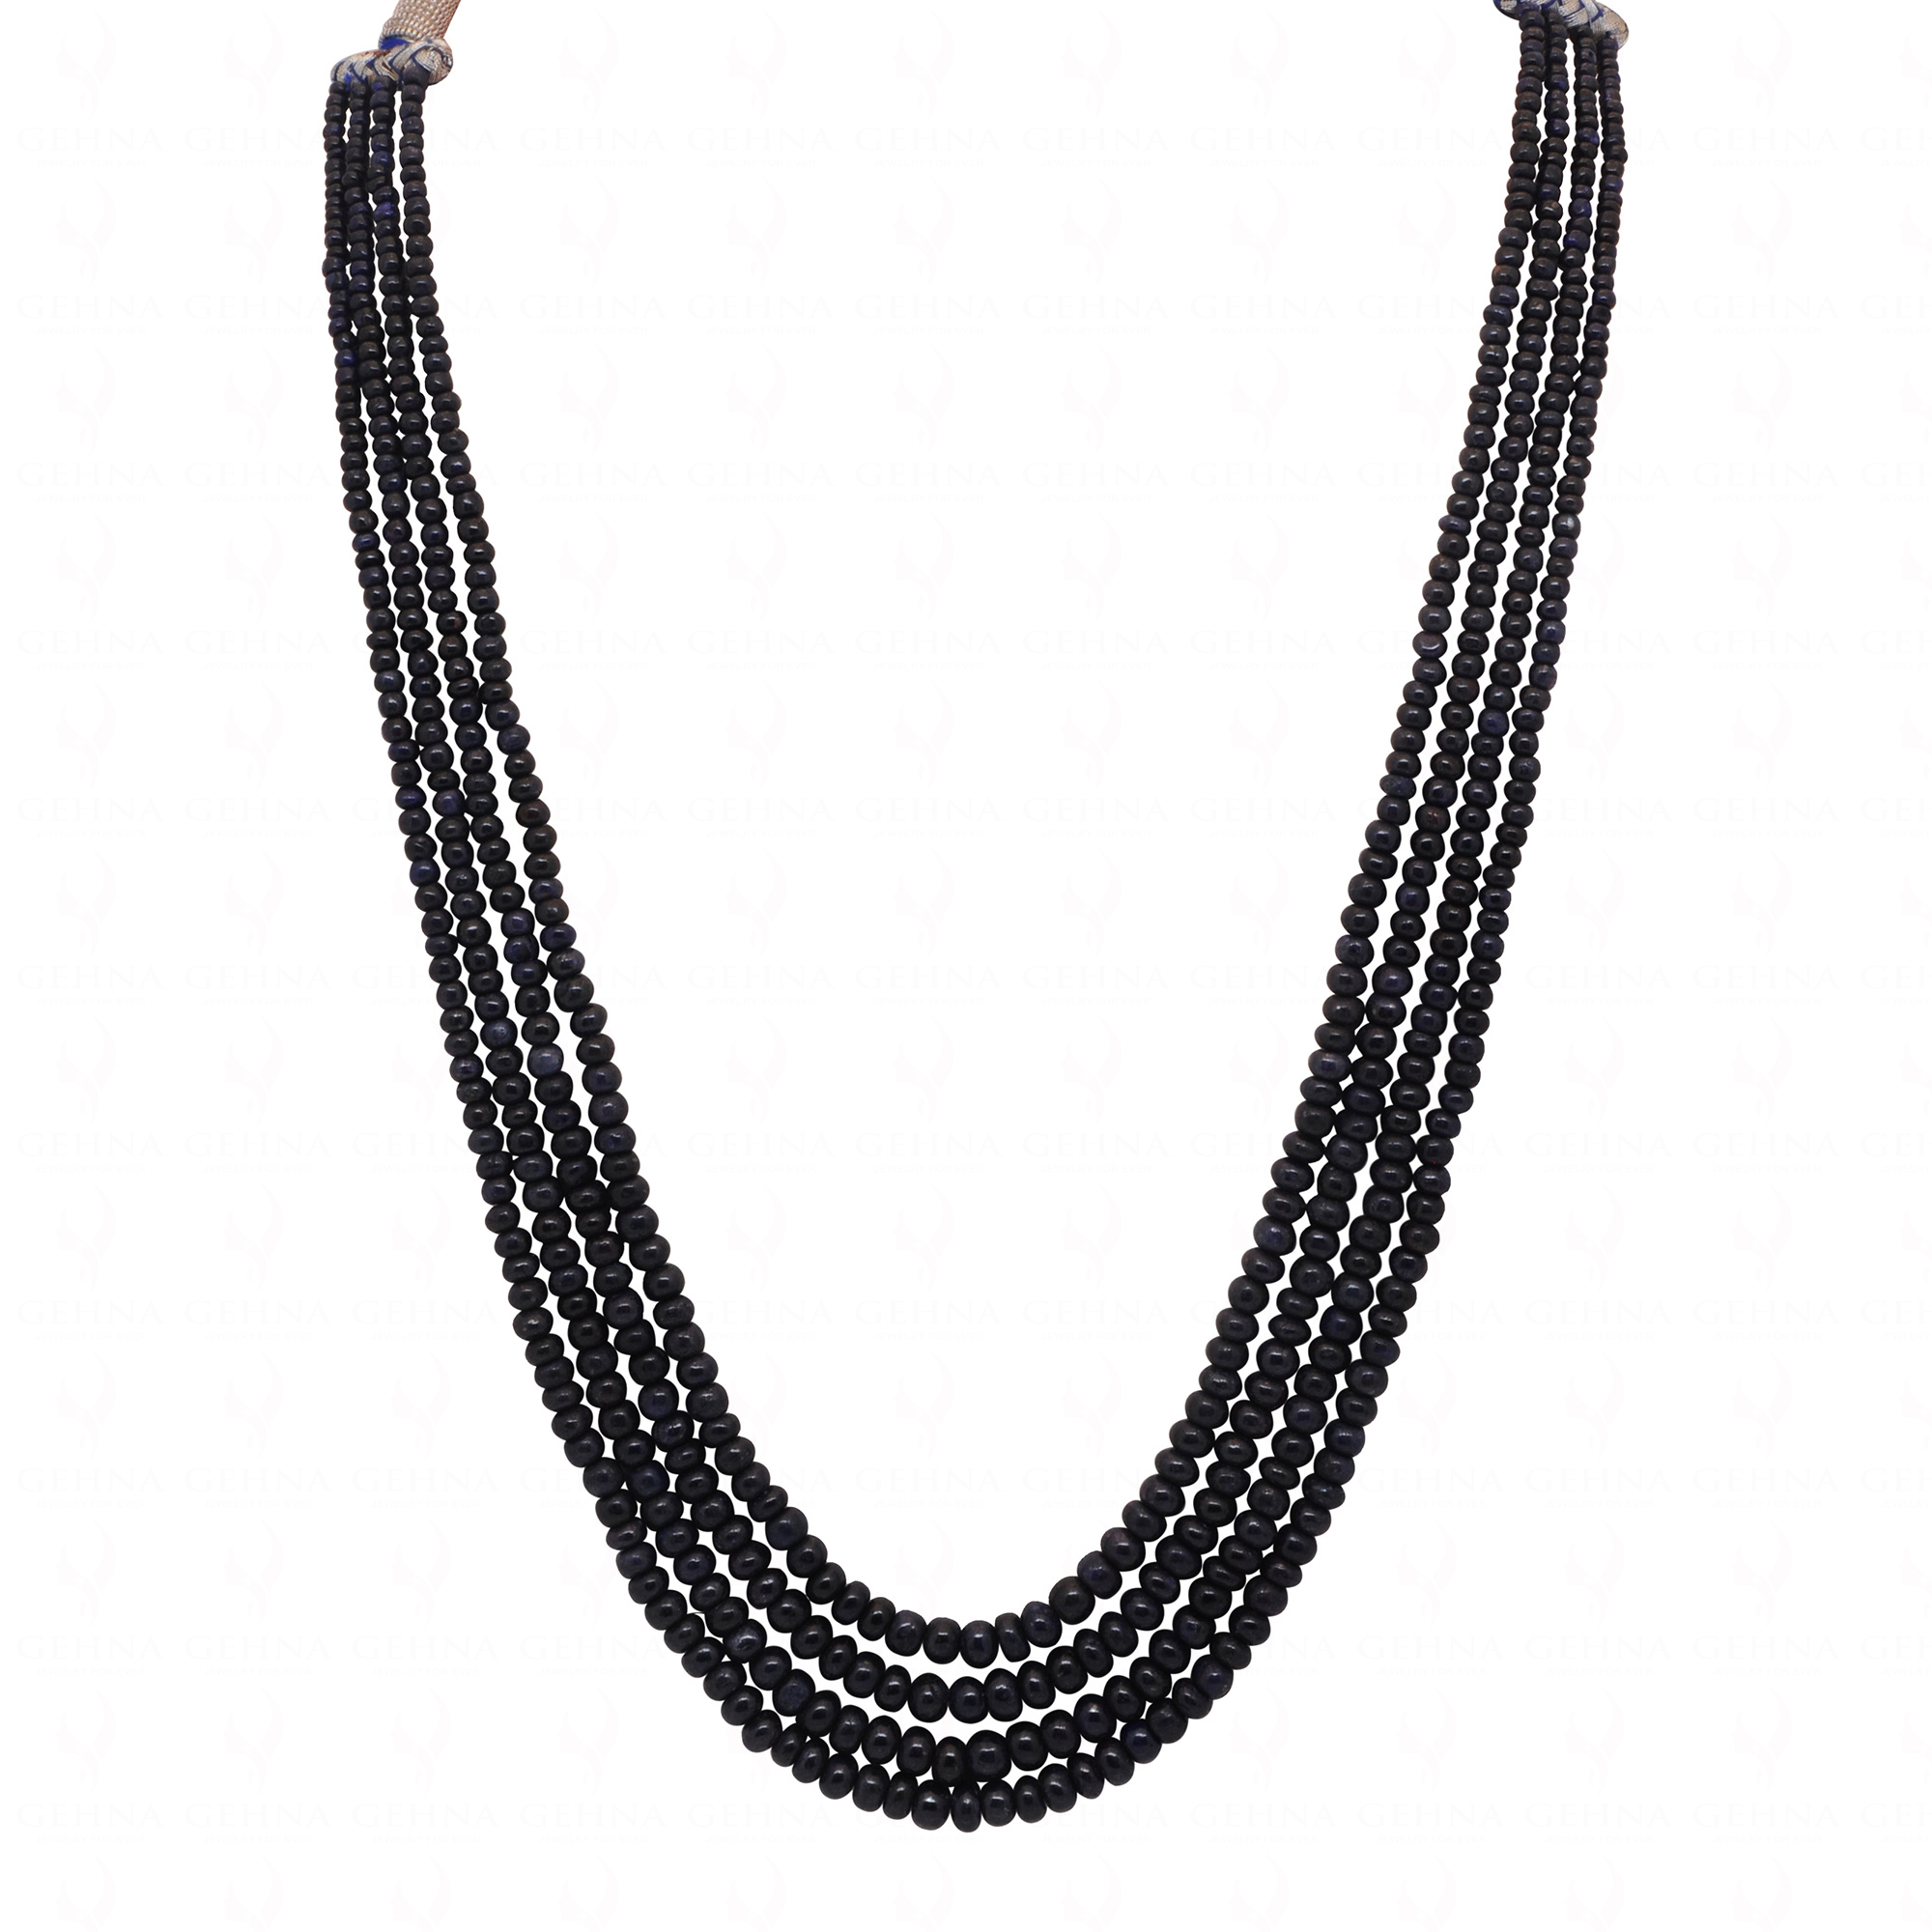 4 Rows Of Blue Sapphire Gemstone Bead Necklace NP-1492